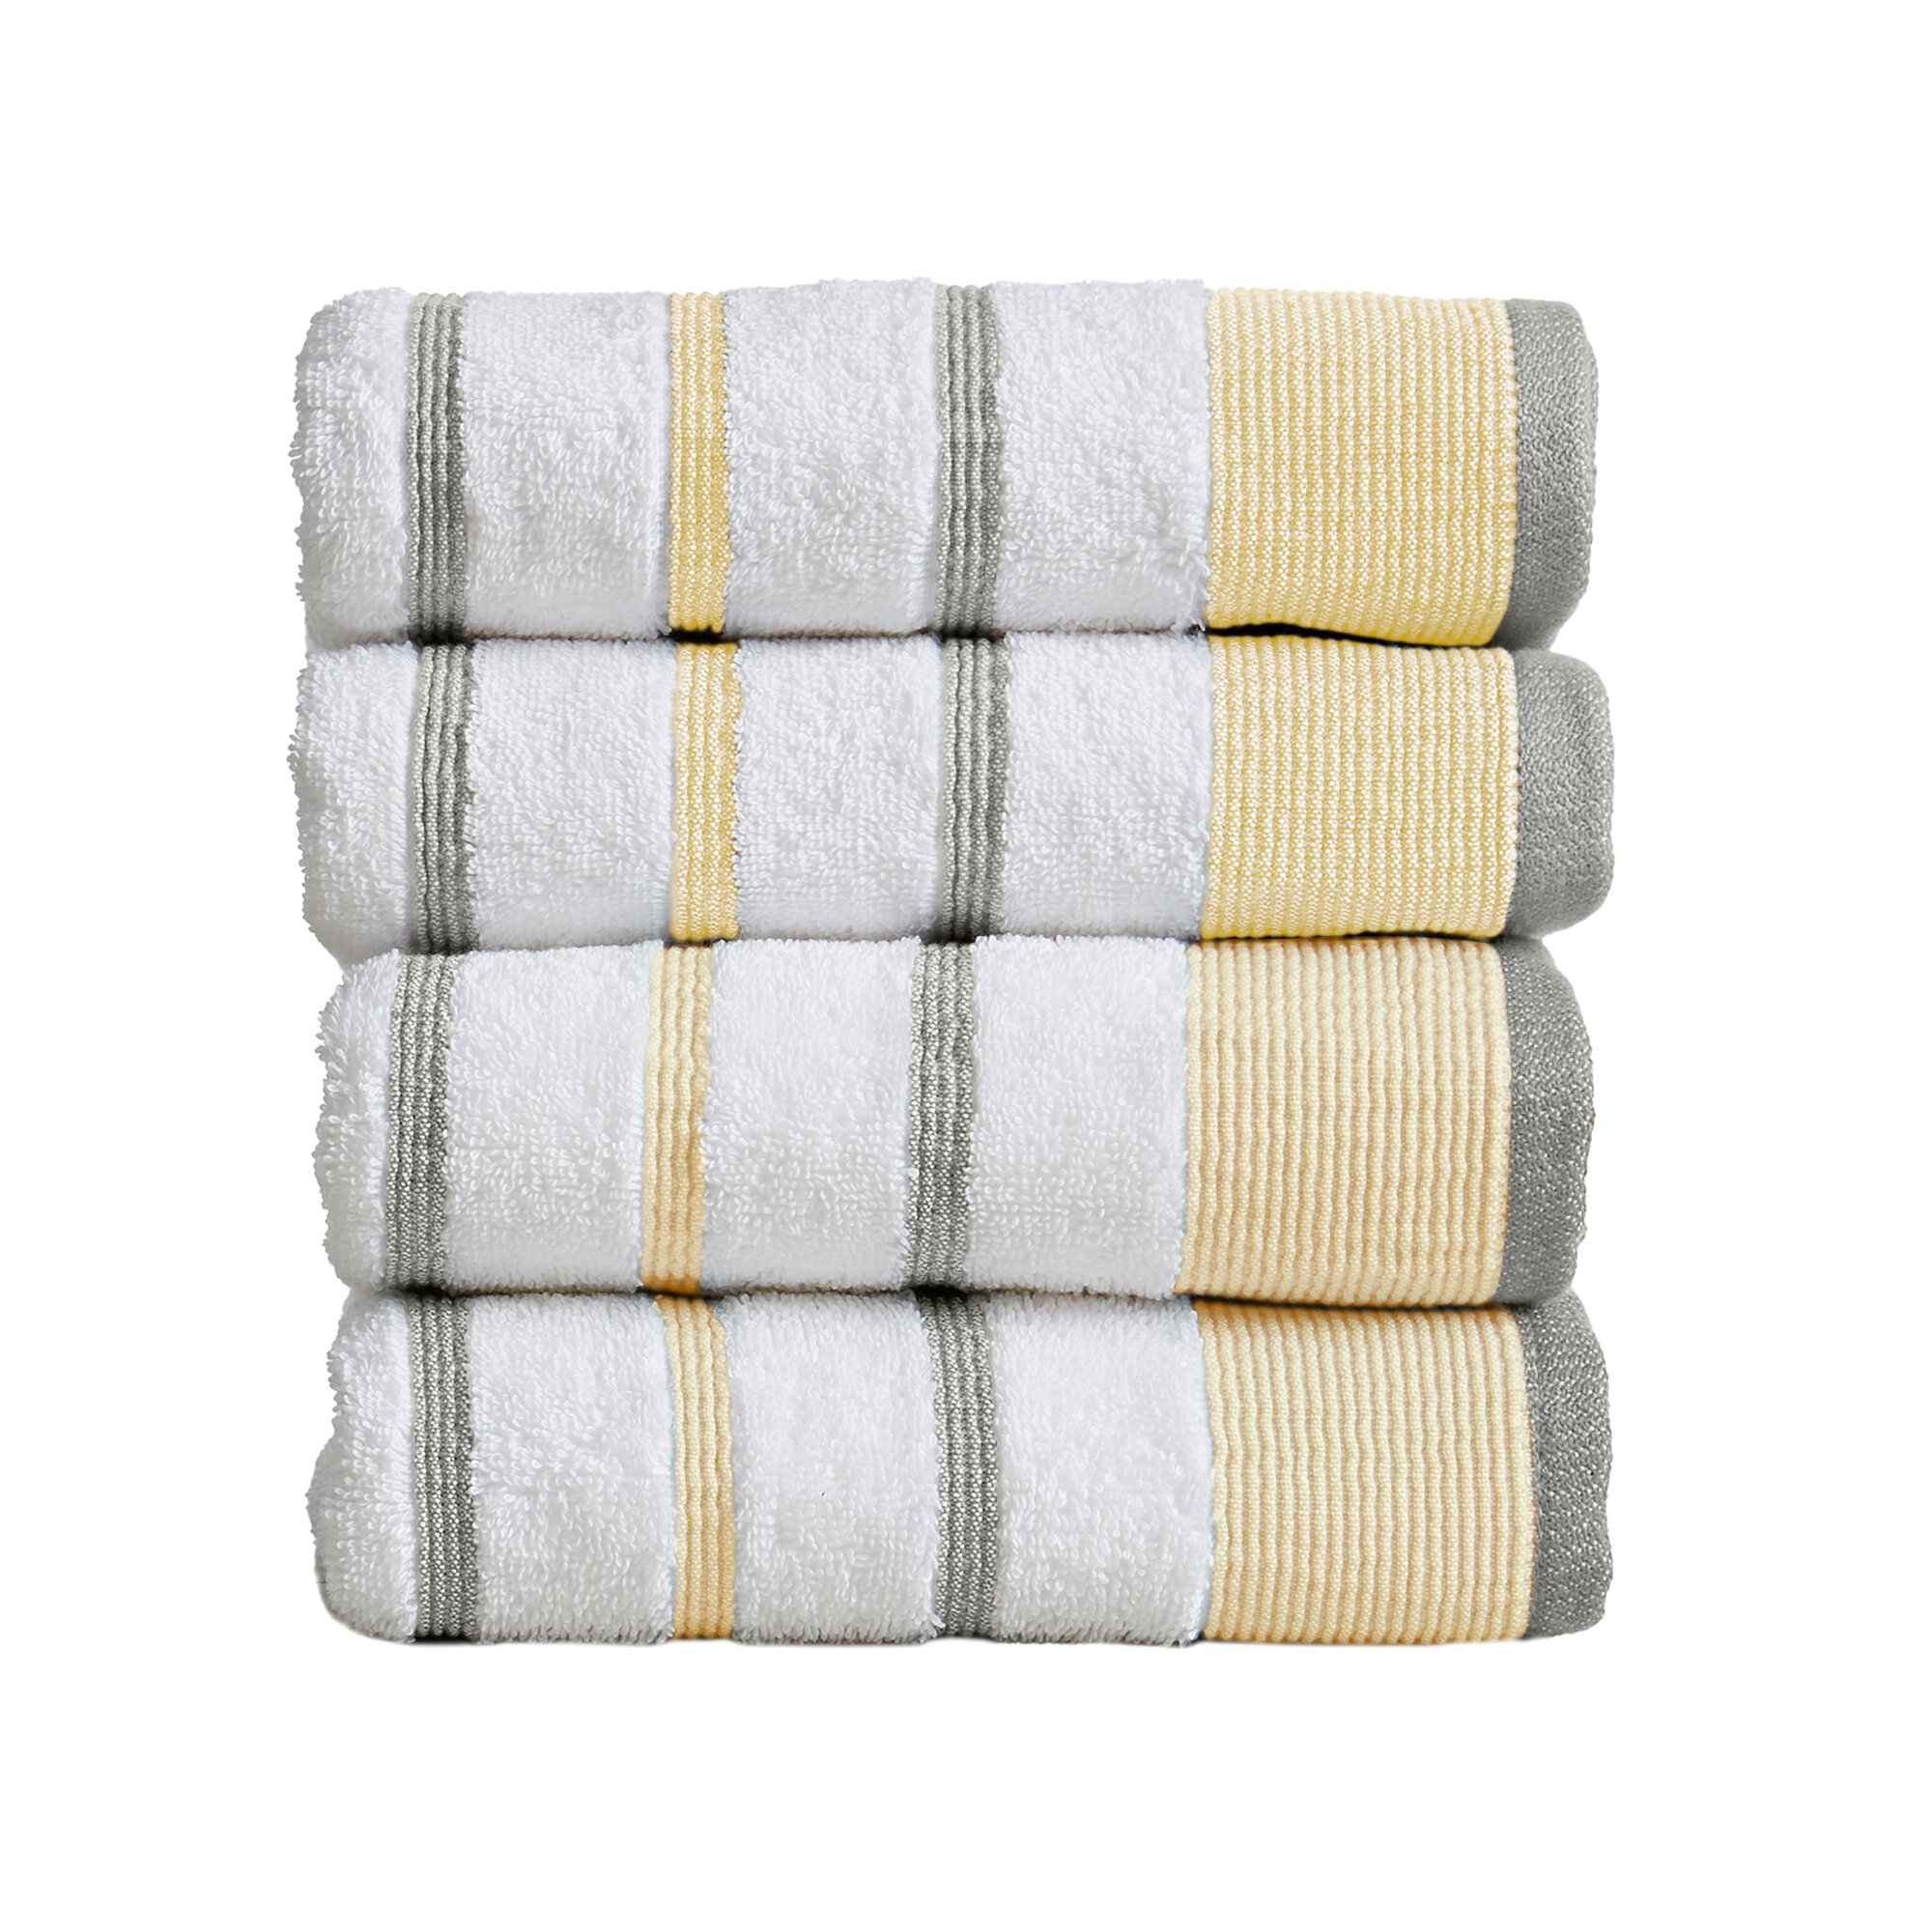 Gold Textiles 24 New White (15x25) Hotel Hand Towels 100% Cotton 10/S Weave Thin Light Weight Quick Drying